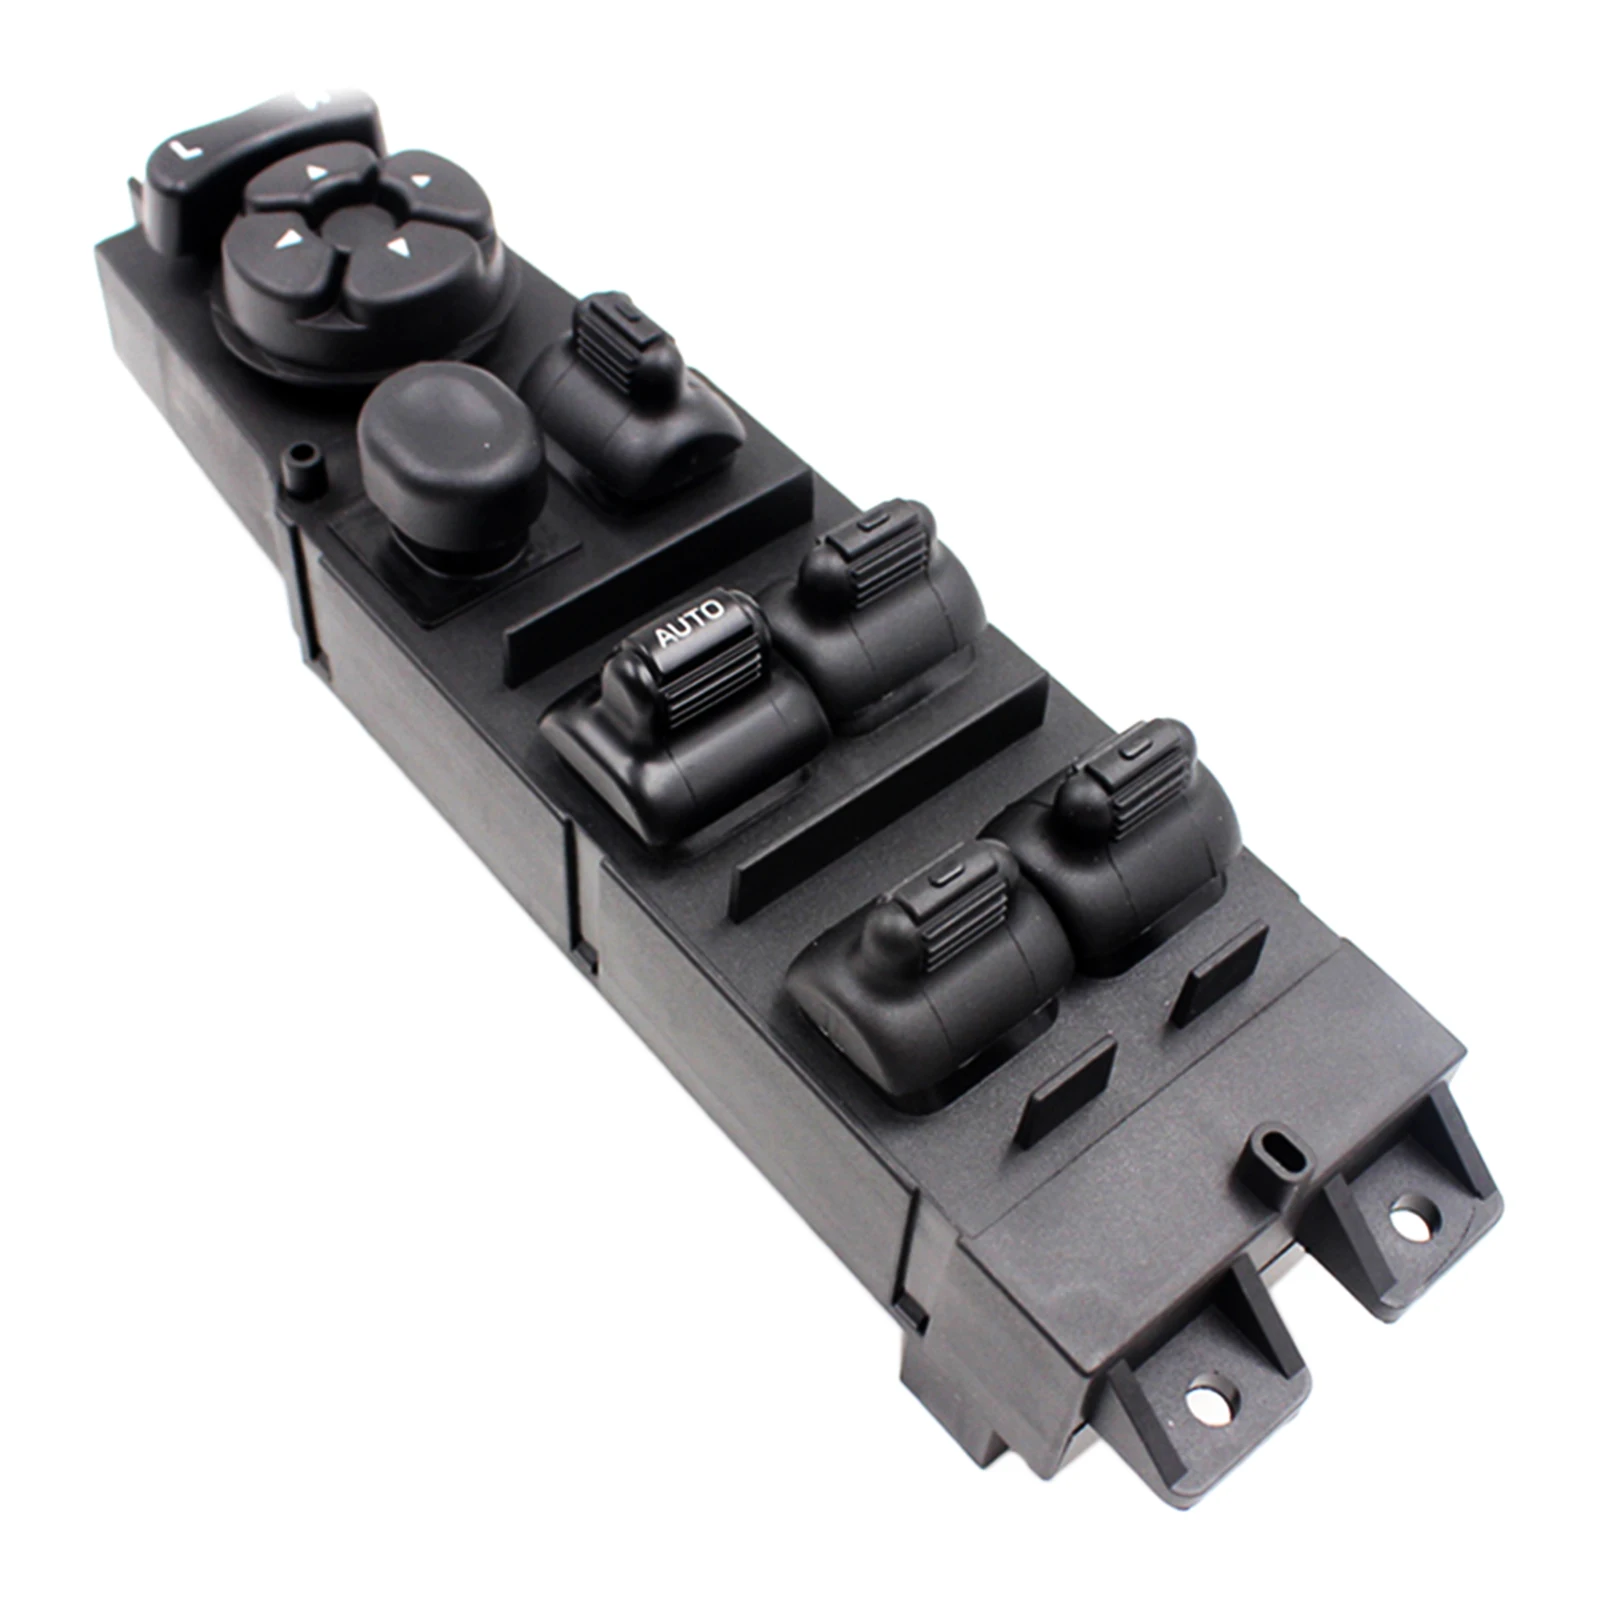 Electric Power Window Switch 5Gu34DX9Ab Driver Side Fit for RAM 1500 2500 3500 Car Parts ACC Easy to Install Replace